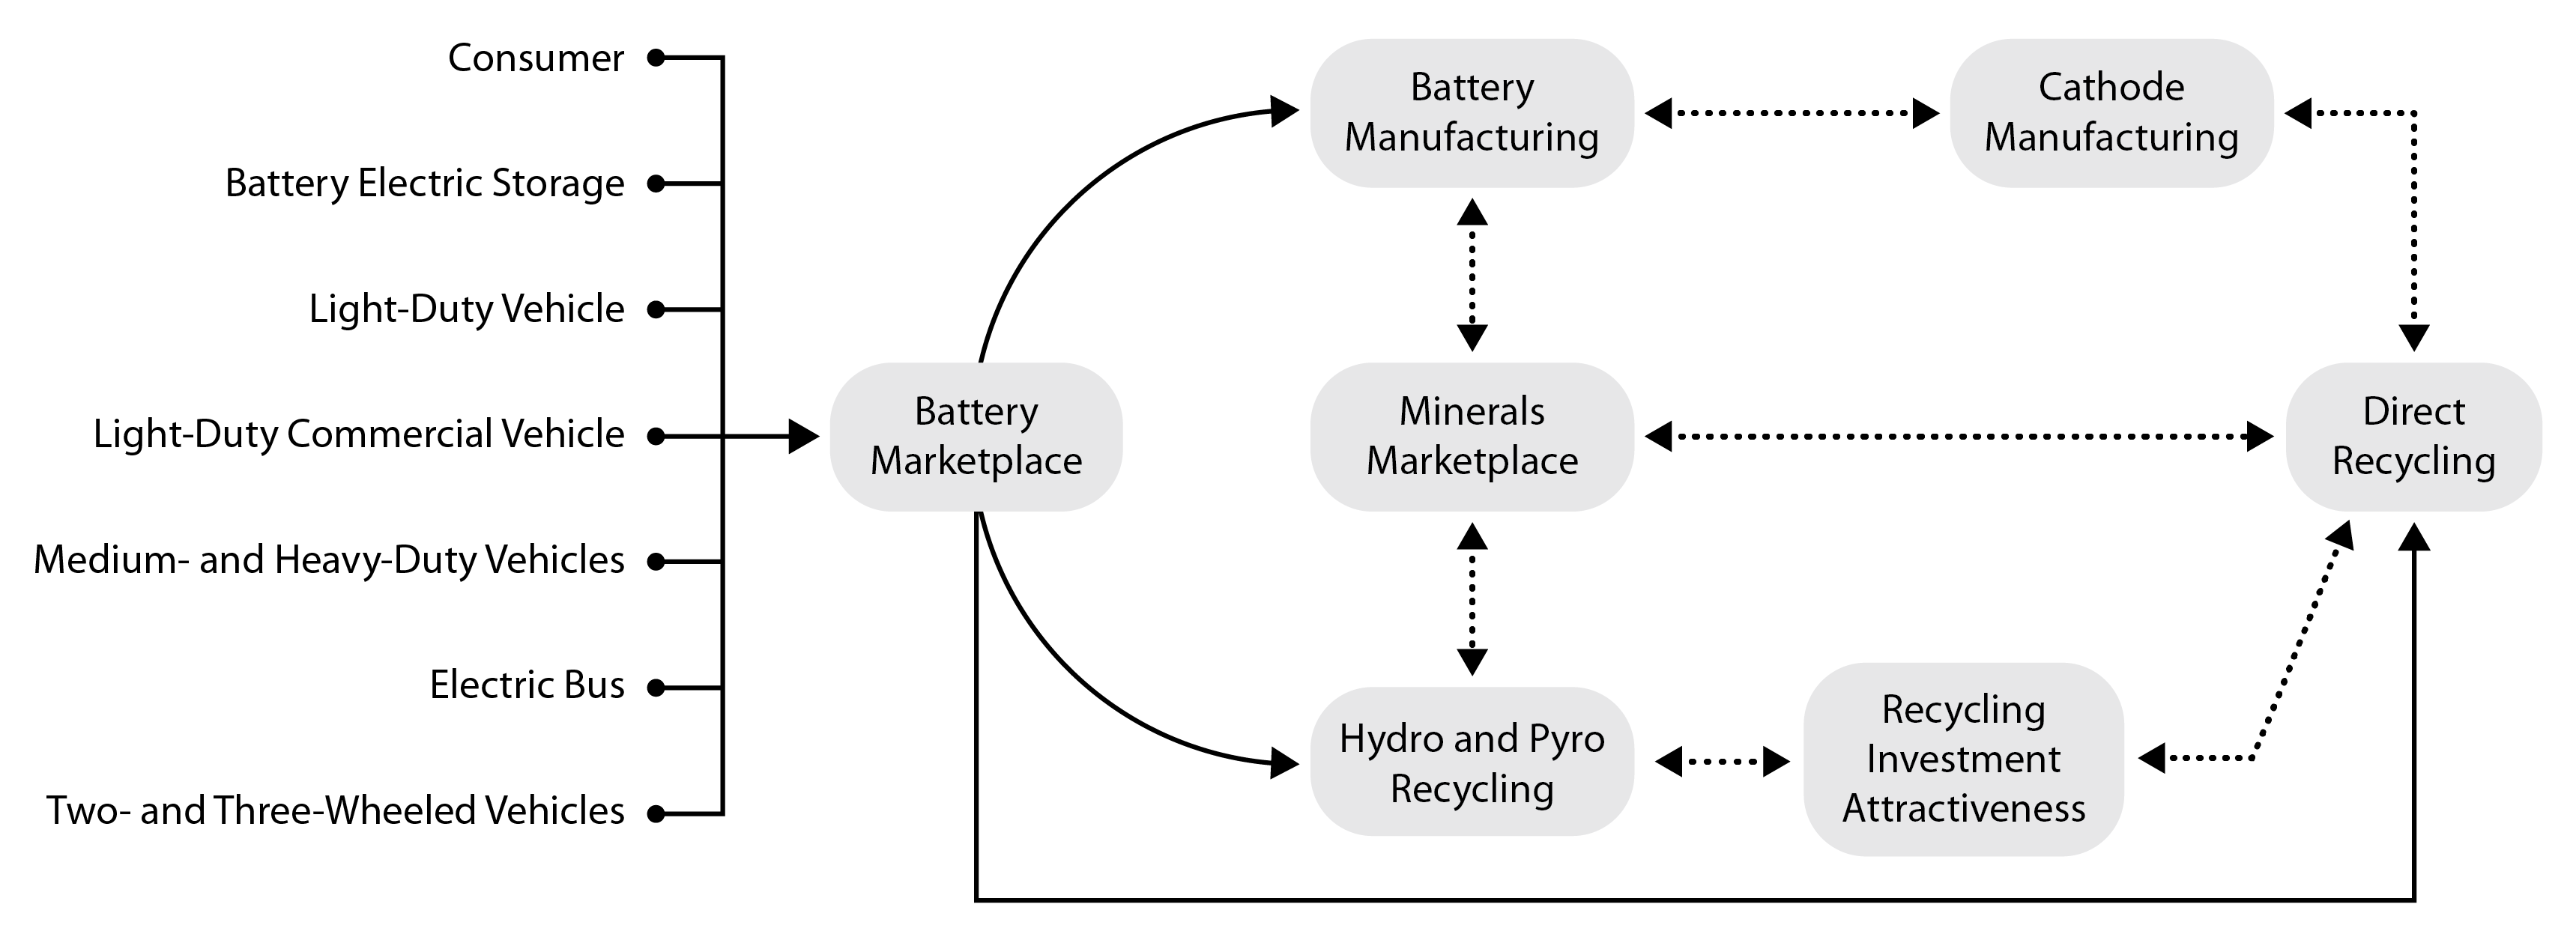 Graphic shows how interconnecting data informs the LIBRA model, including: consumer, battery electric storage, light-duty vehicle, commercial vehicle, medium- and heavy-duty vehicles, electric bus, two- and three-wheeled vehicles, battery marketplace, hydro and pyro recycling, minerals marketplace, battery manufacturing, cathode manufacturing, direct recycling, recycling investment attractiveness.